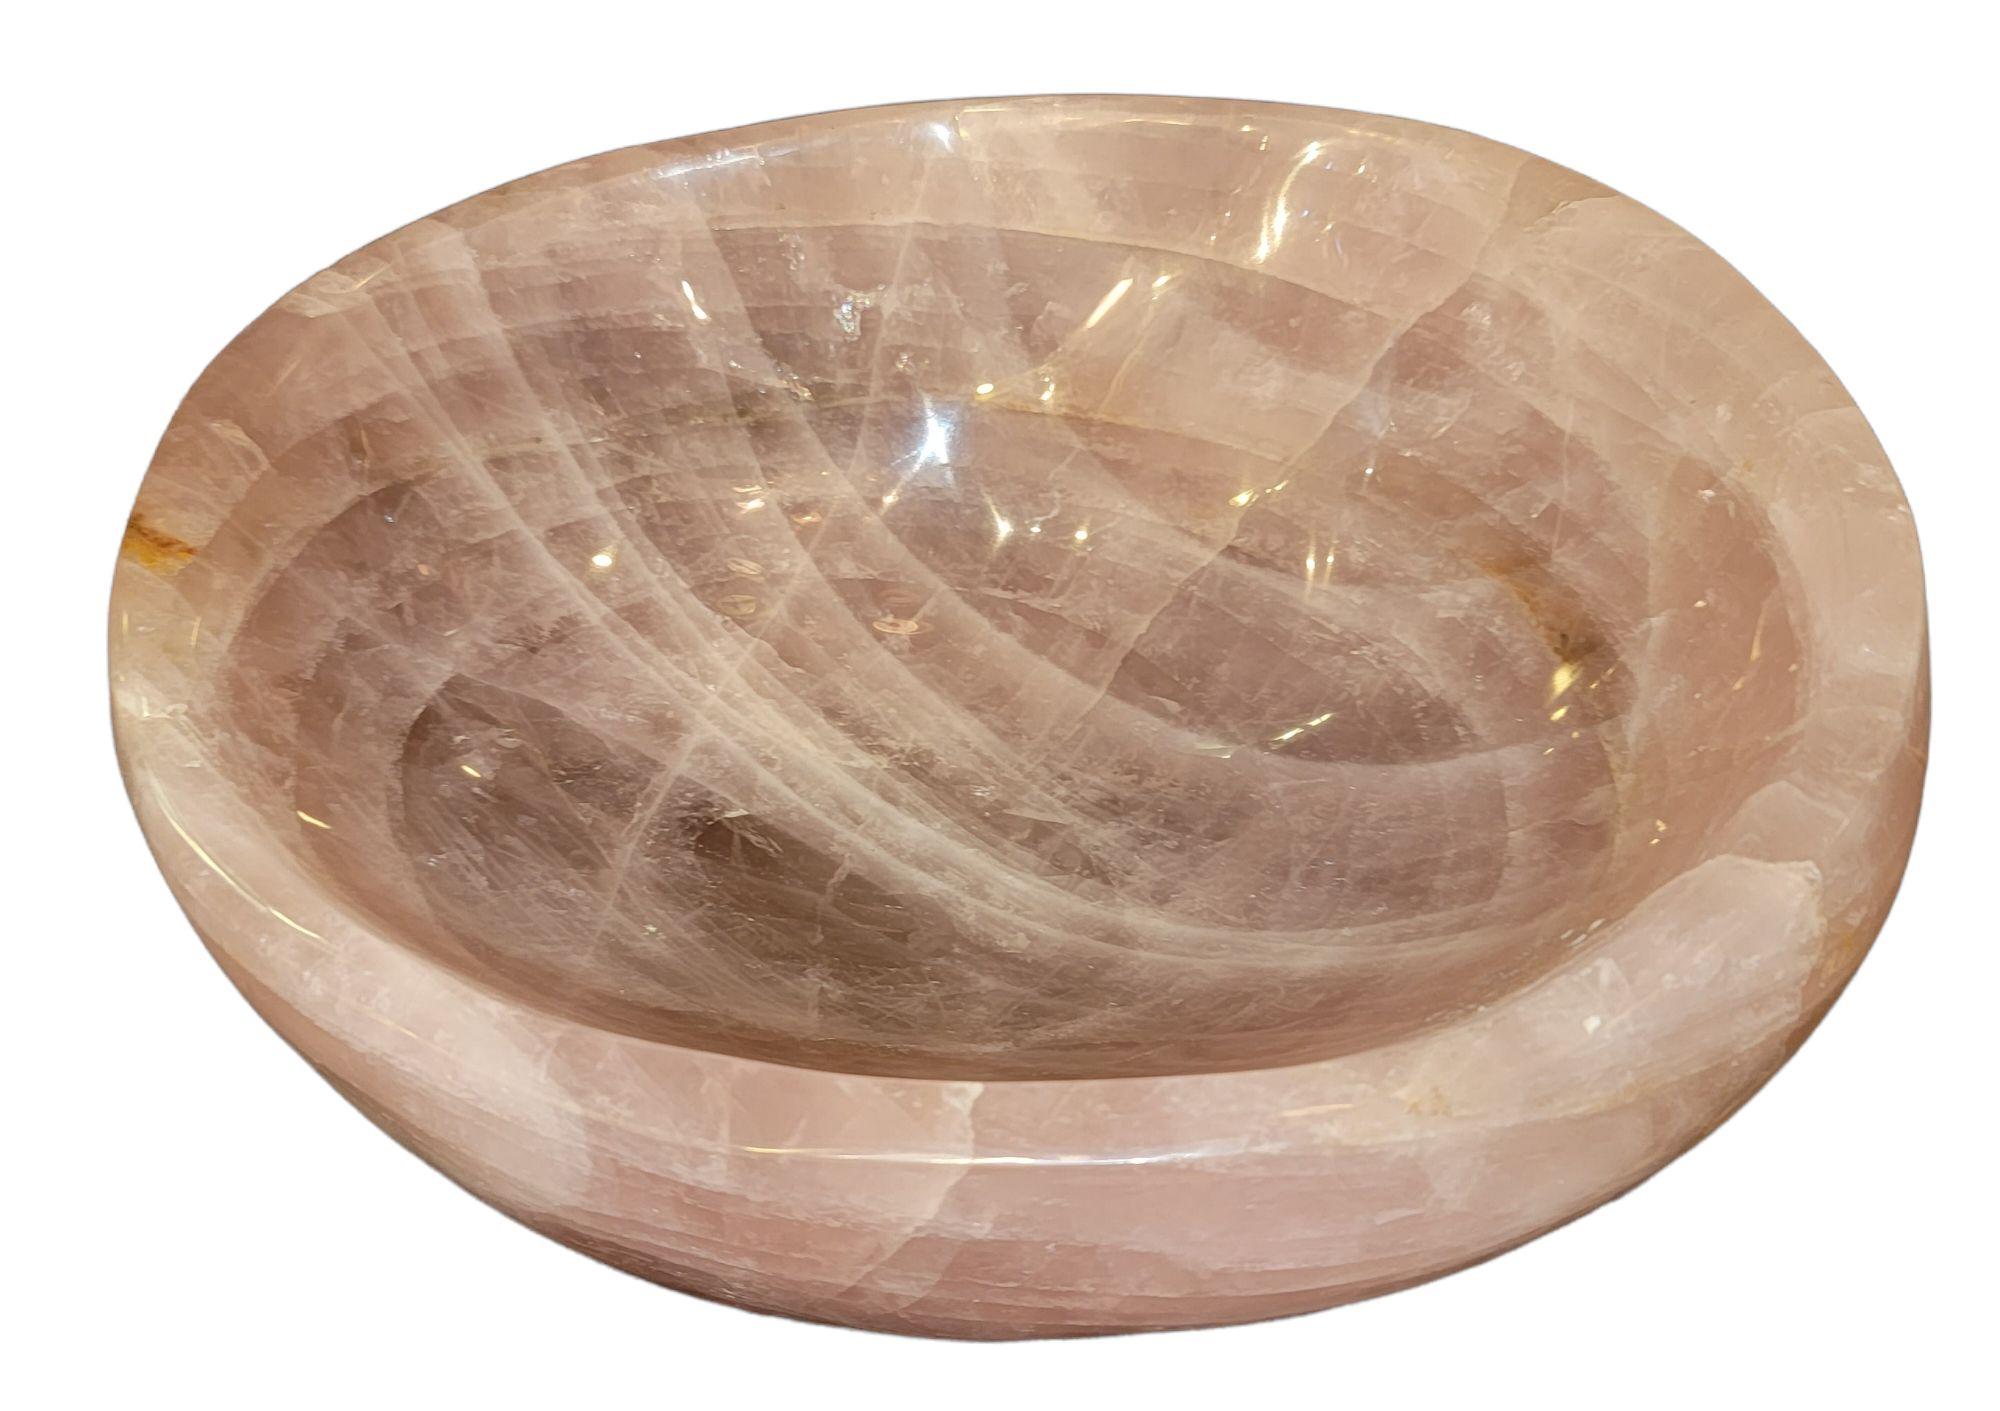 Vintage Rose Quart crystal large Bowl with beautiful design and heavy in weight.
Wonderful variegated whole and pinks throughout the bowl.

Measures: 10 wide x 8 deep x 4 high.